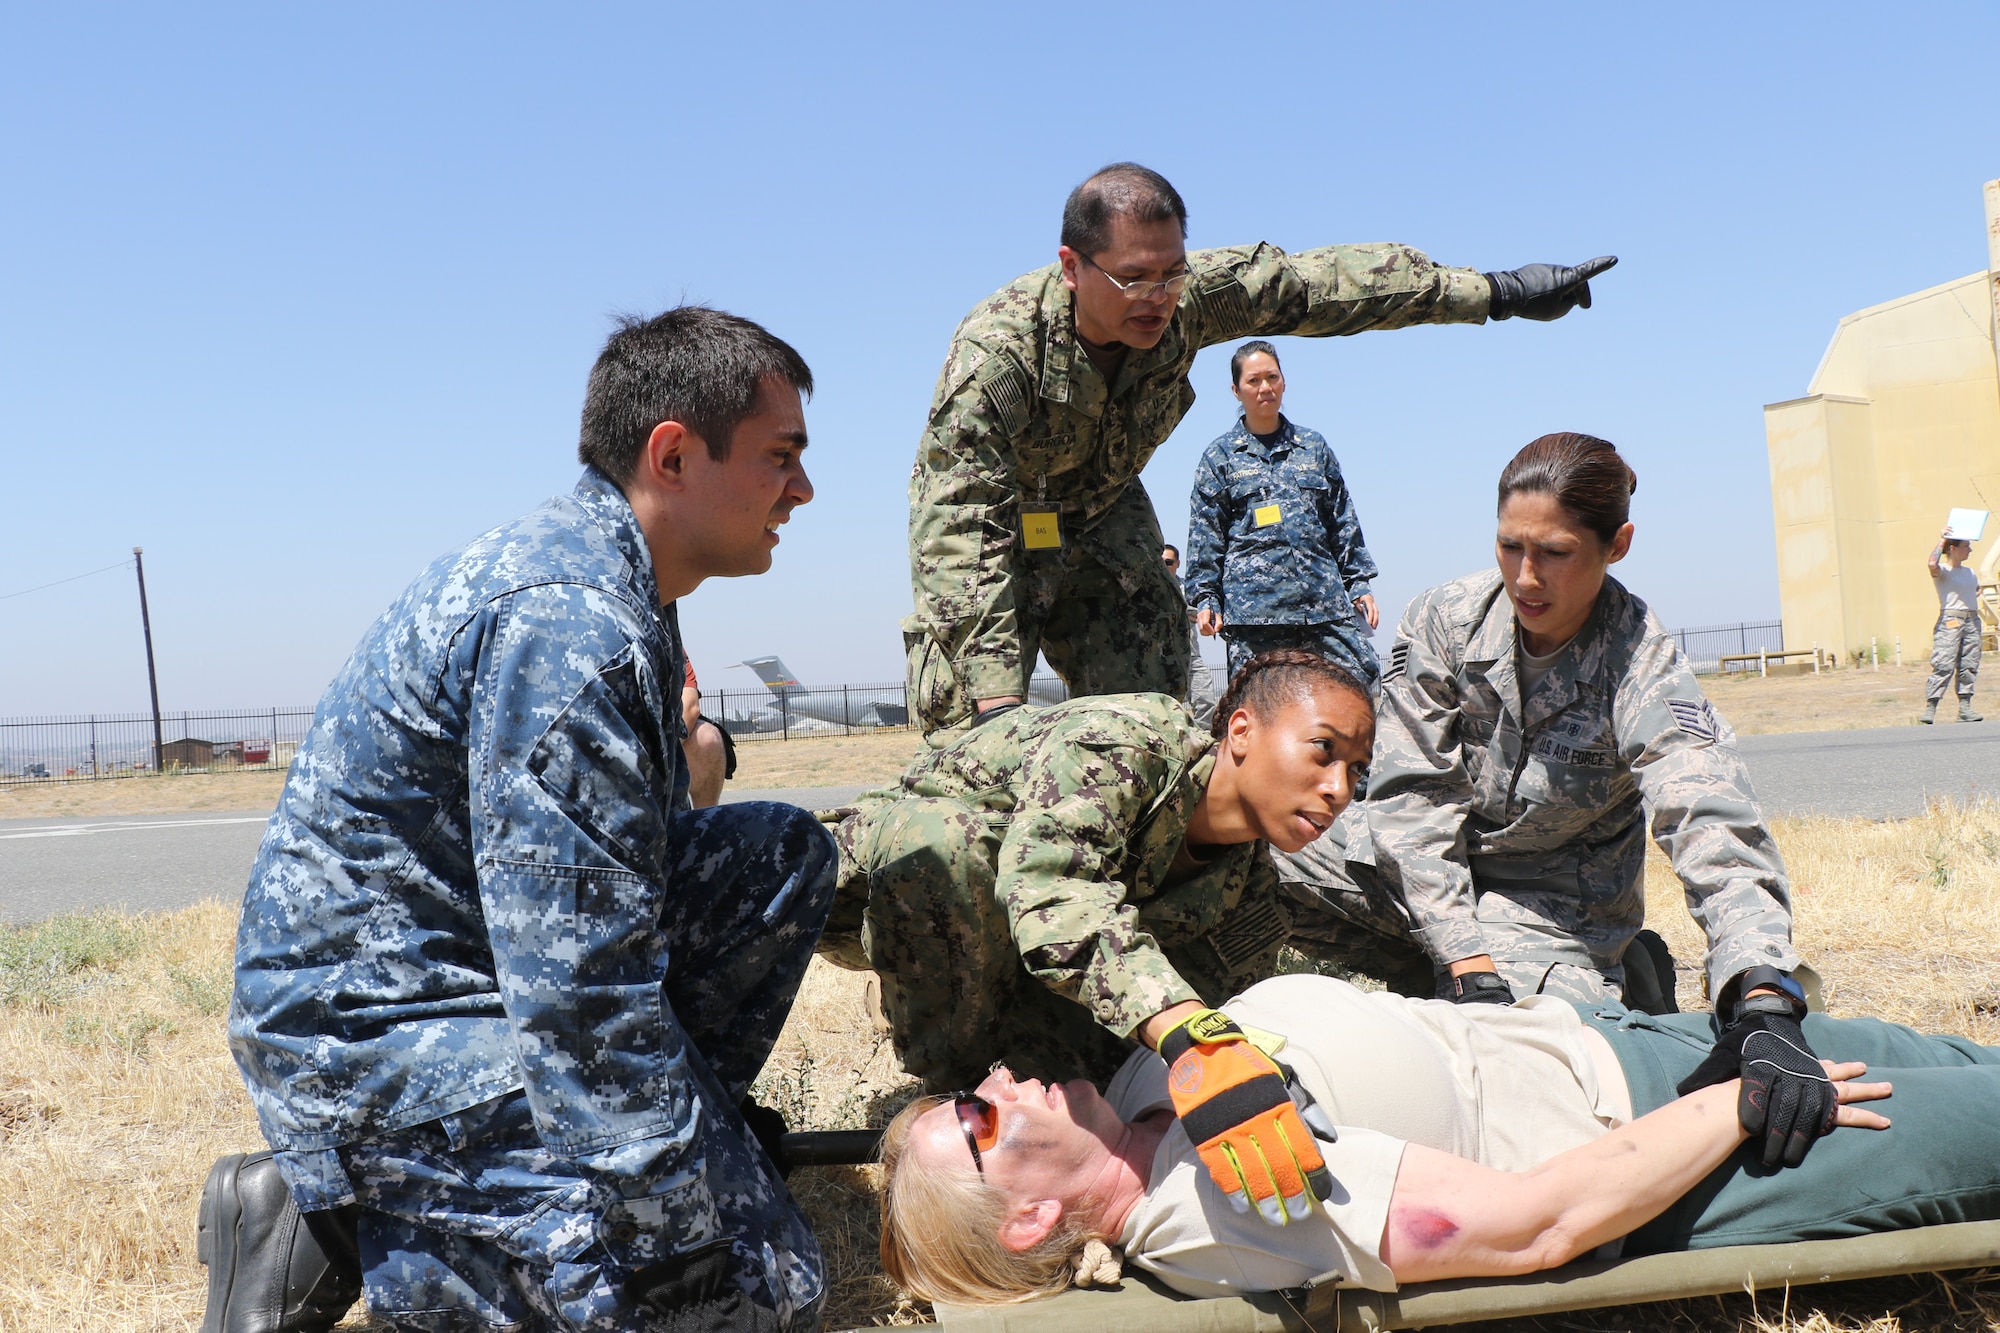 U.S. Navy Hospital Corpsman Asia Rankin, Emergency Medical Force Detachment D, Camp Pendleton, secures a simulated patient for transport while U.S. Navy Petty Officer 2nd Class Christopher Burgoa, EMF Det. B, Camp Pendleton, directs the team toward a simulated Battalion Aid Station here June 23, 2018.